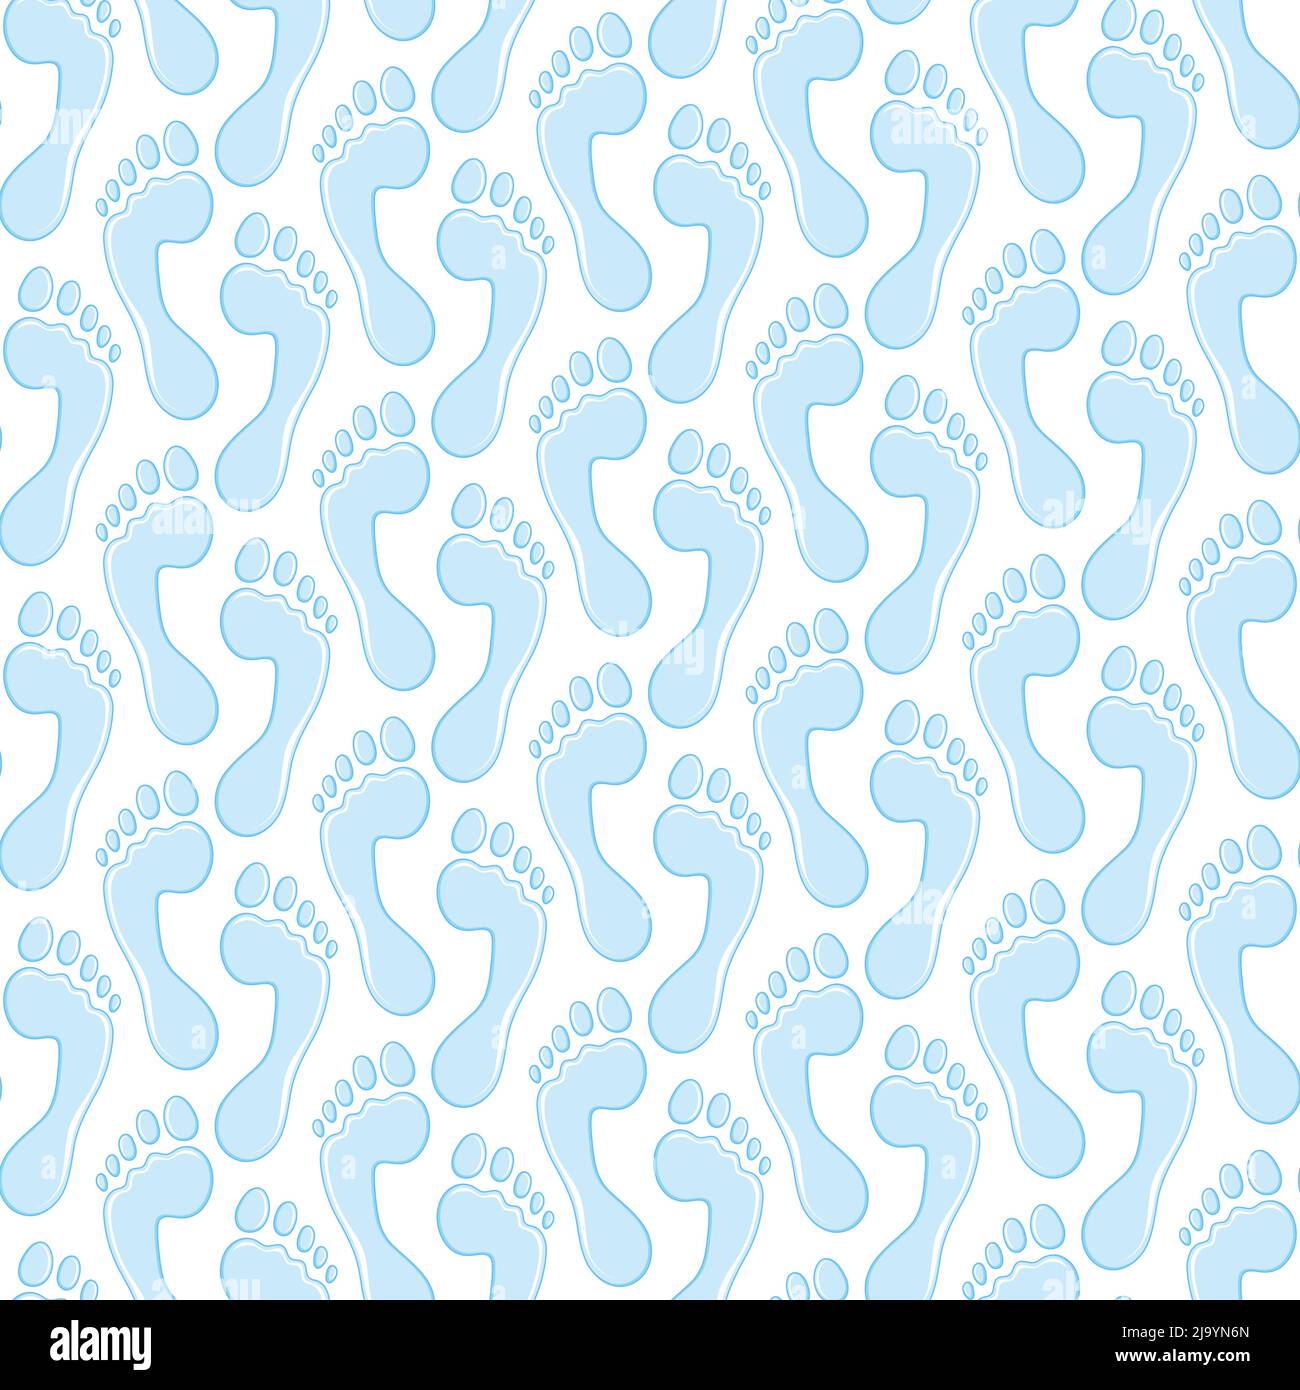 Seamless pattern with footprint, feet, footstep from the water. Vector background with isolated objects on white. Stock Vector